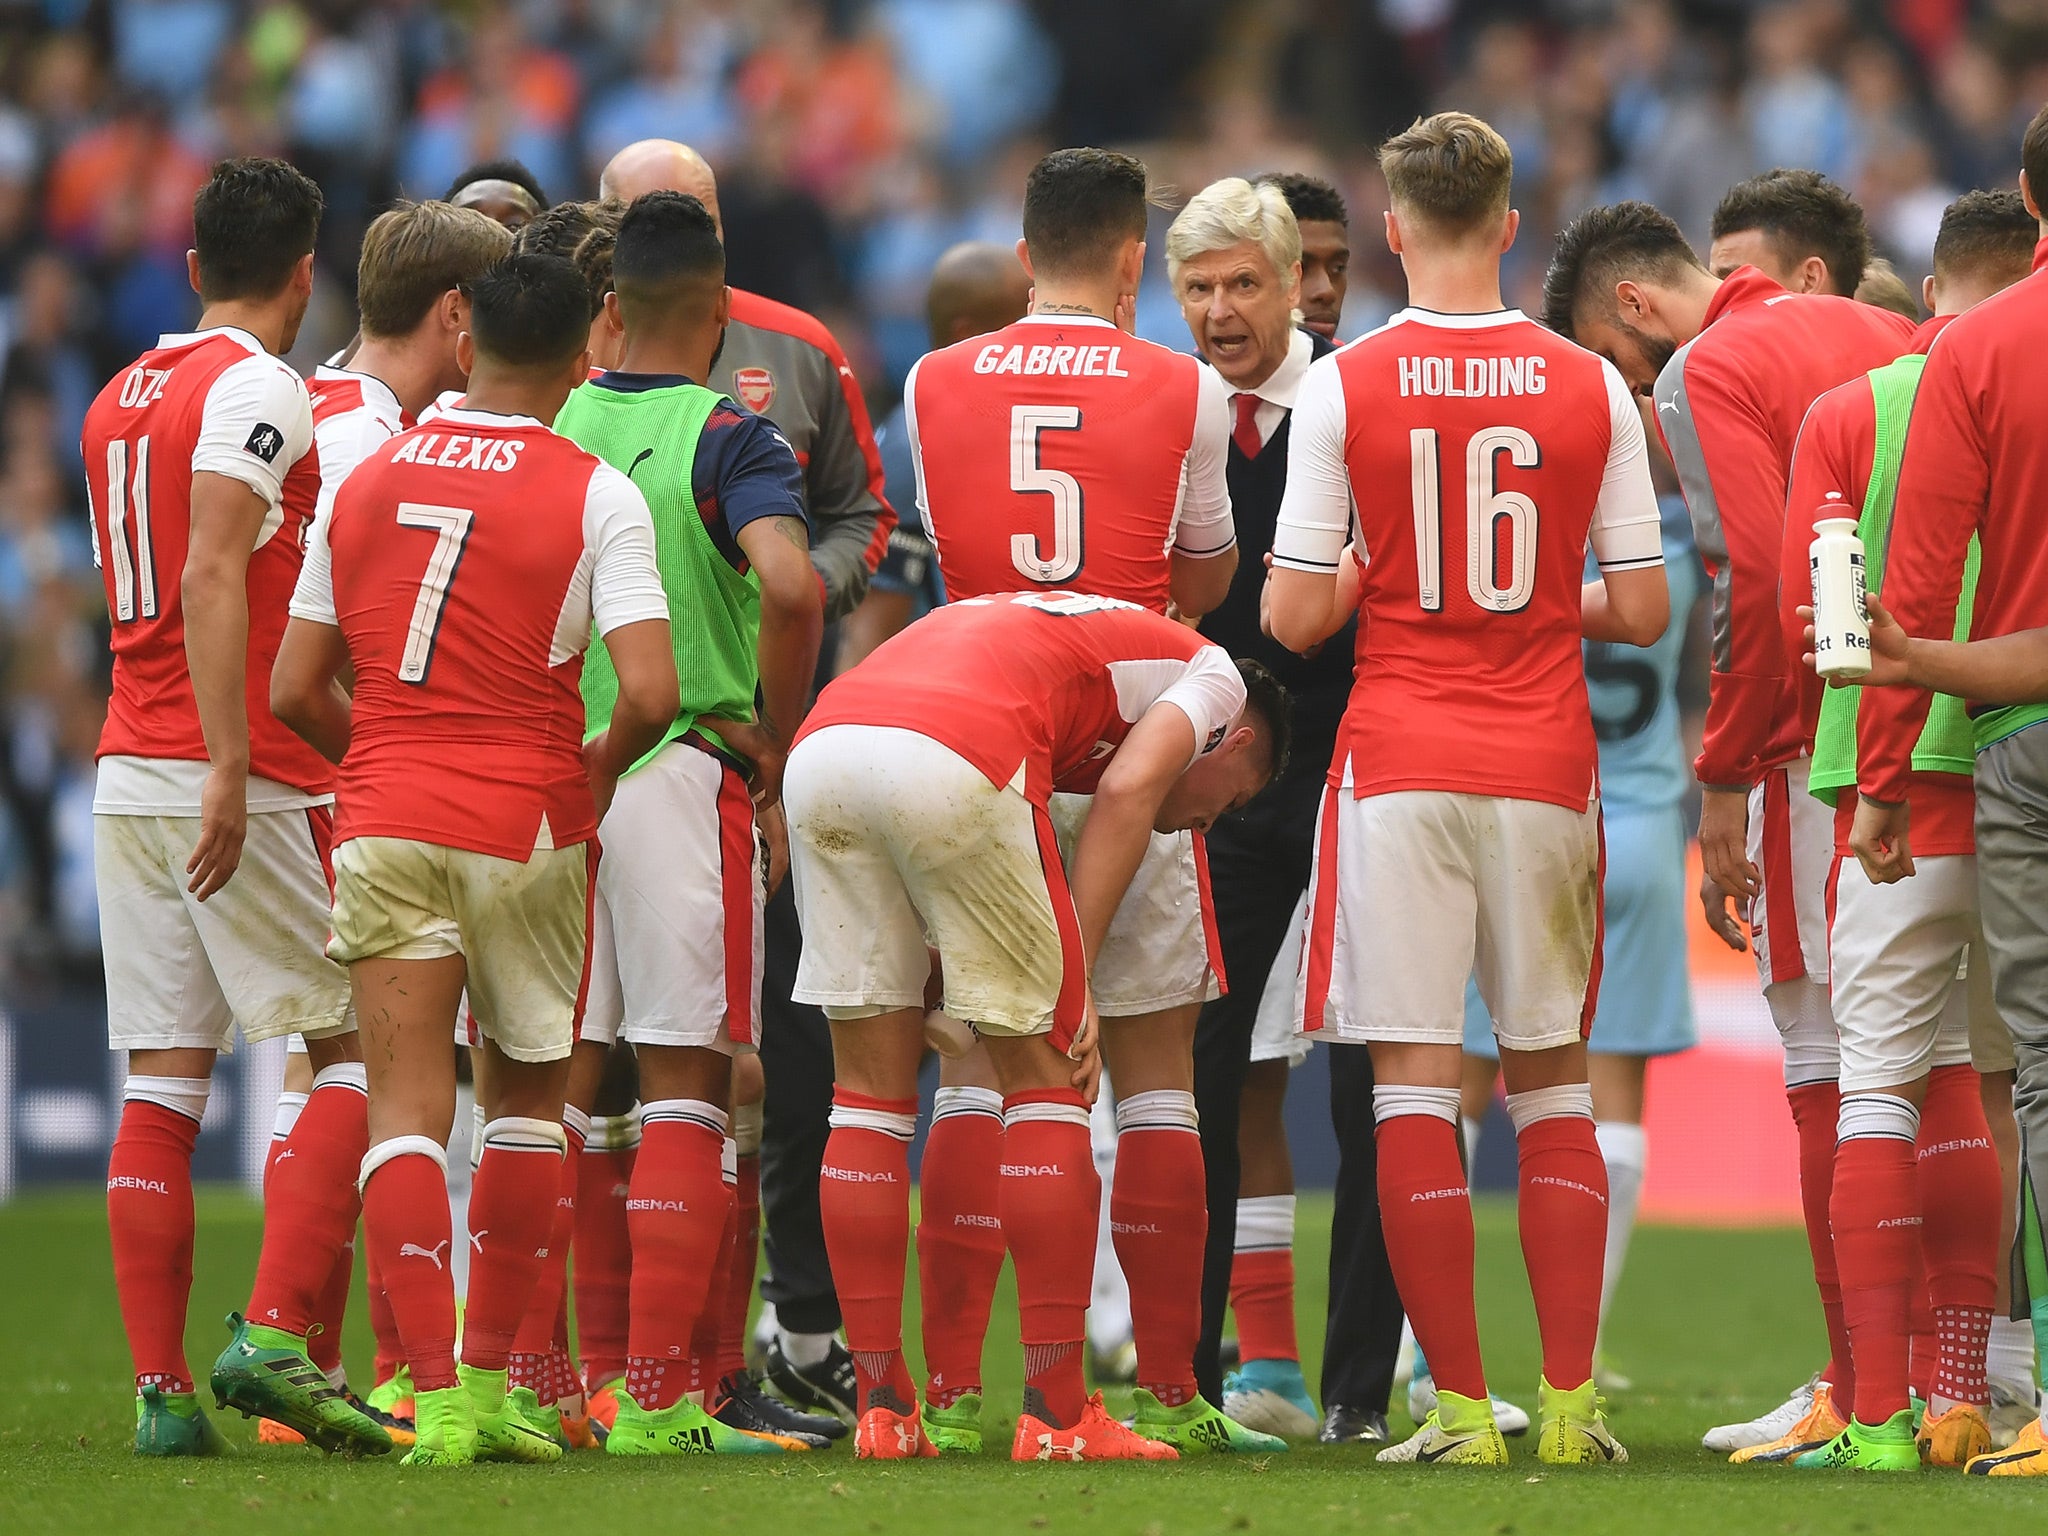 Arsenal's players clambered back on board the good ship Arsene Wenger